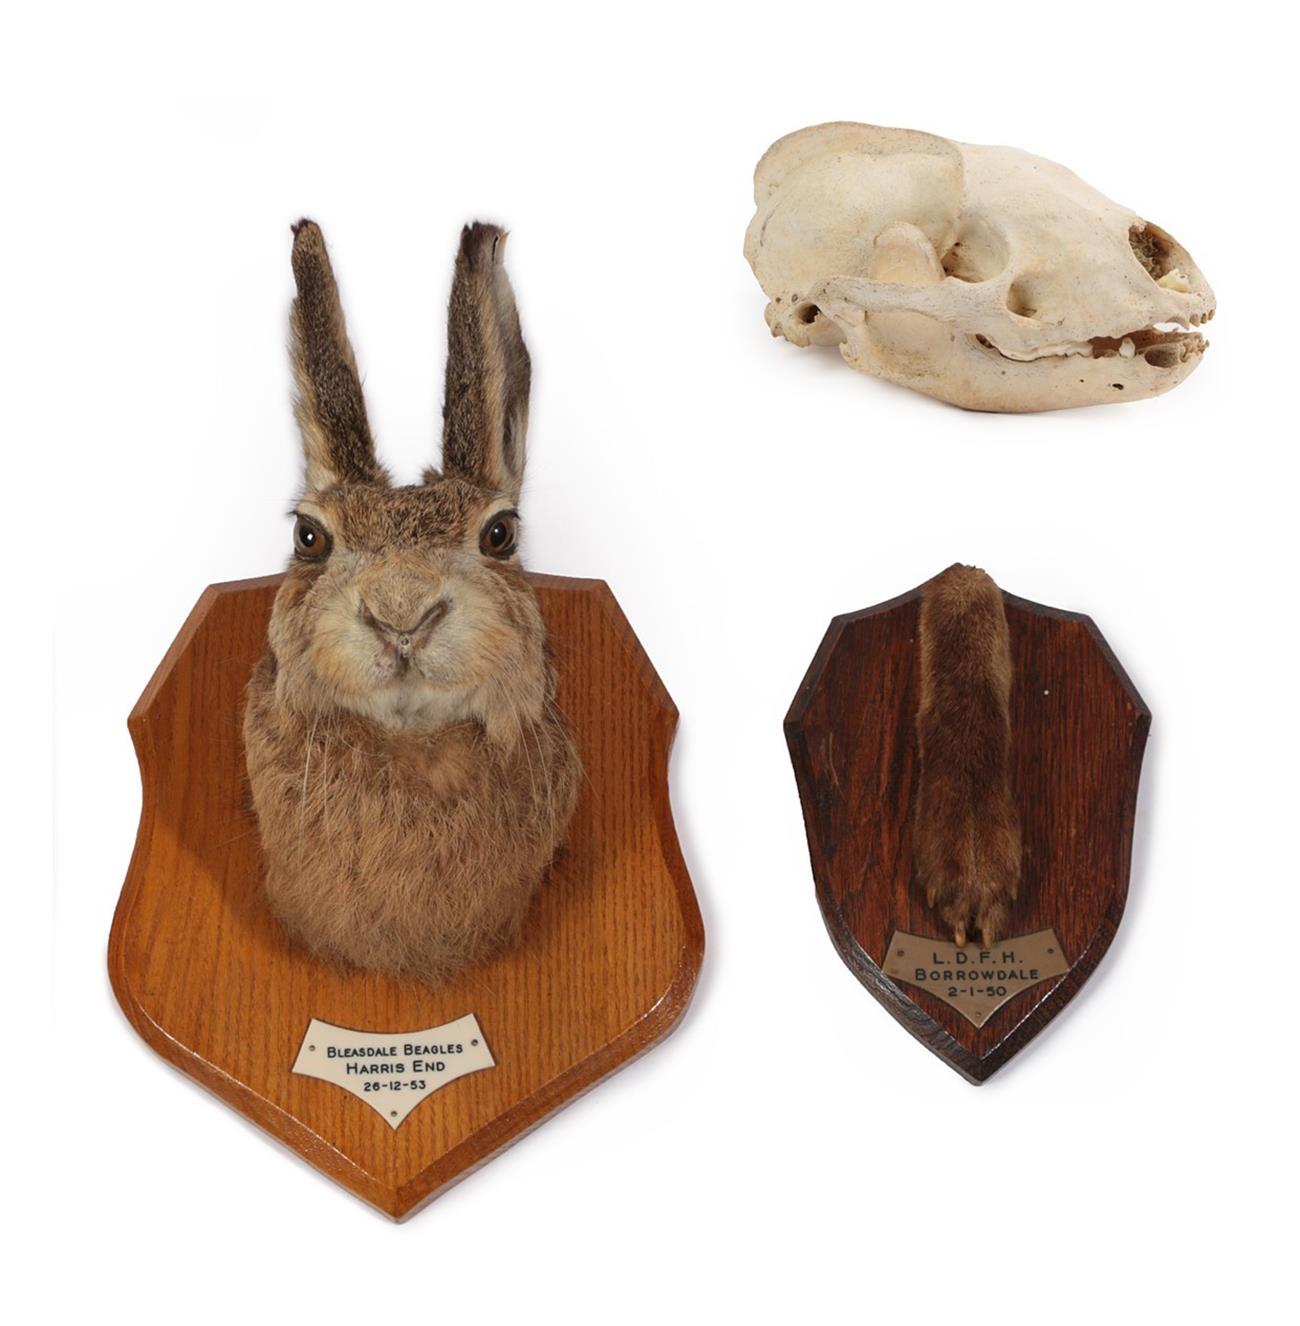 Lot 48 - Taxidermy: European Hare (Lupus lupus), dated 26th December 1953, Bleasdale Beagle, by Thomas...